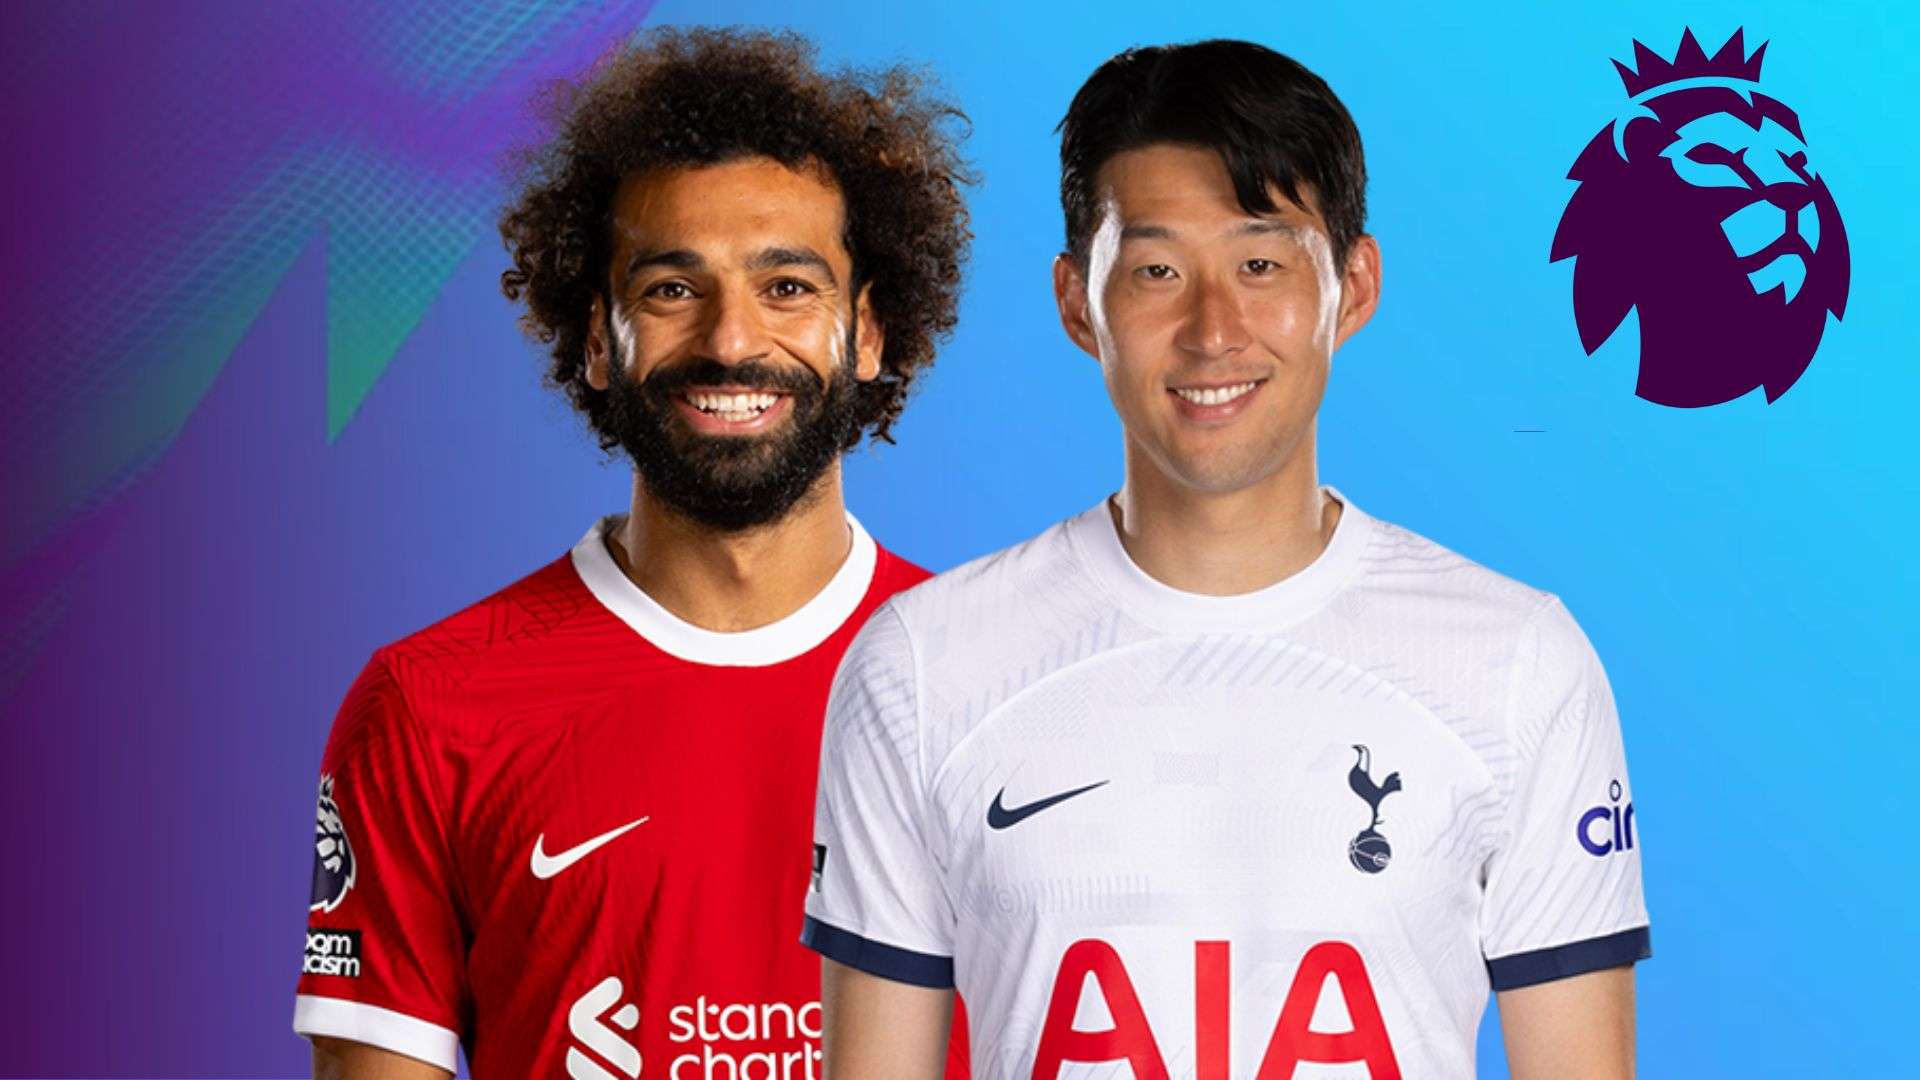 Mo Salah and Heung-min son on blue premier league background with logo